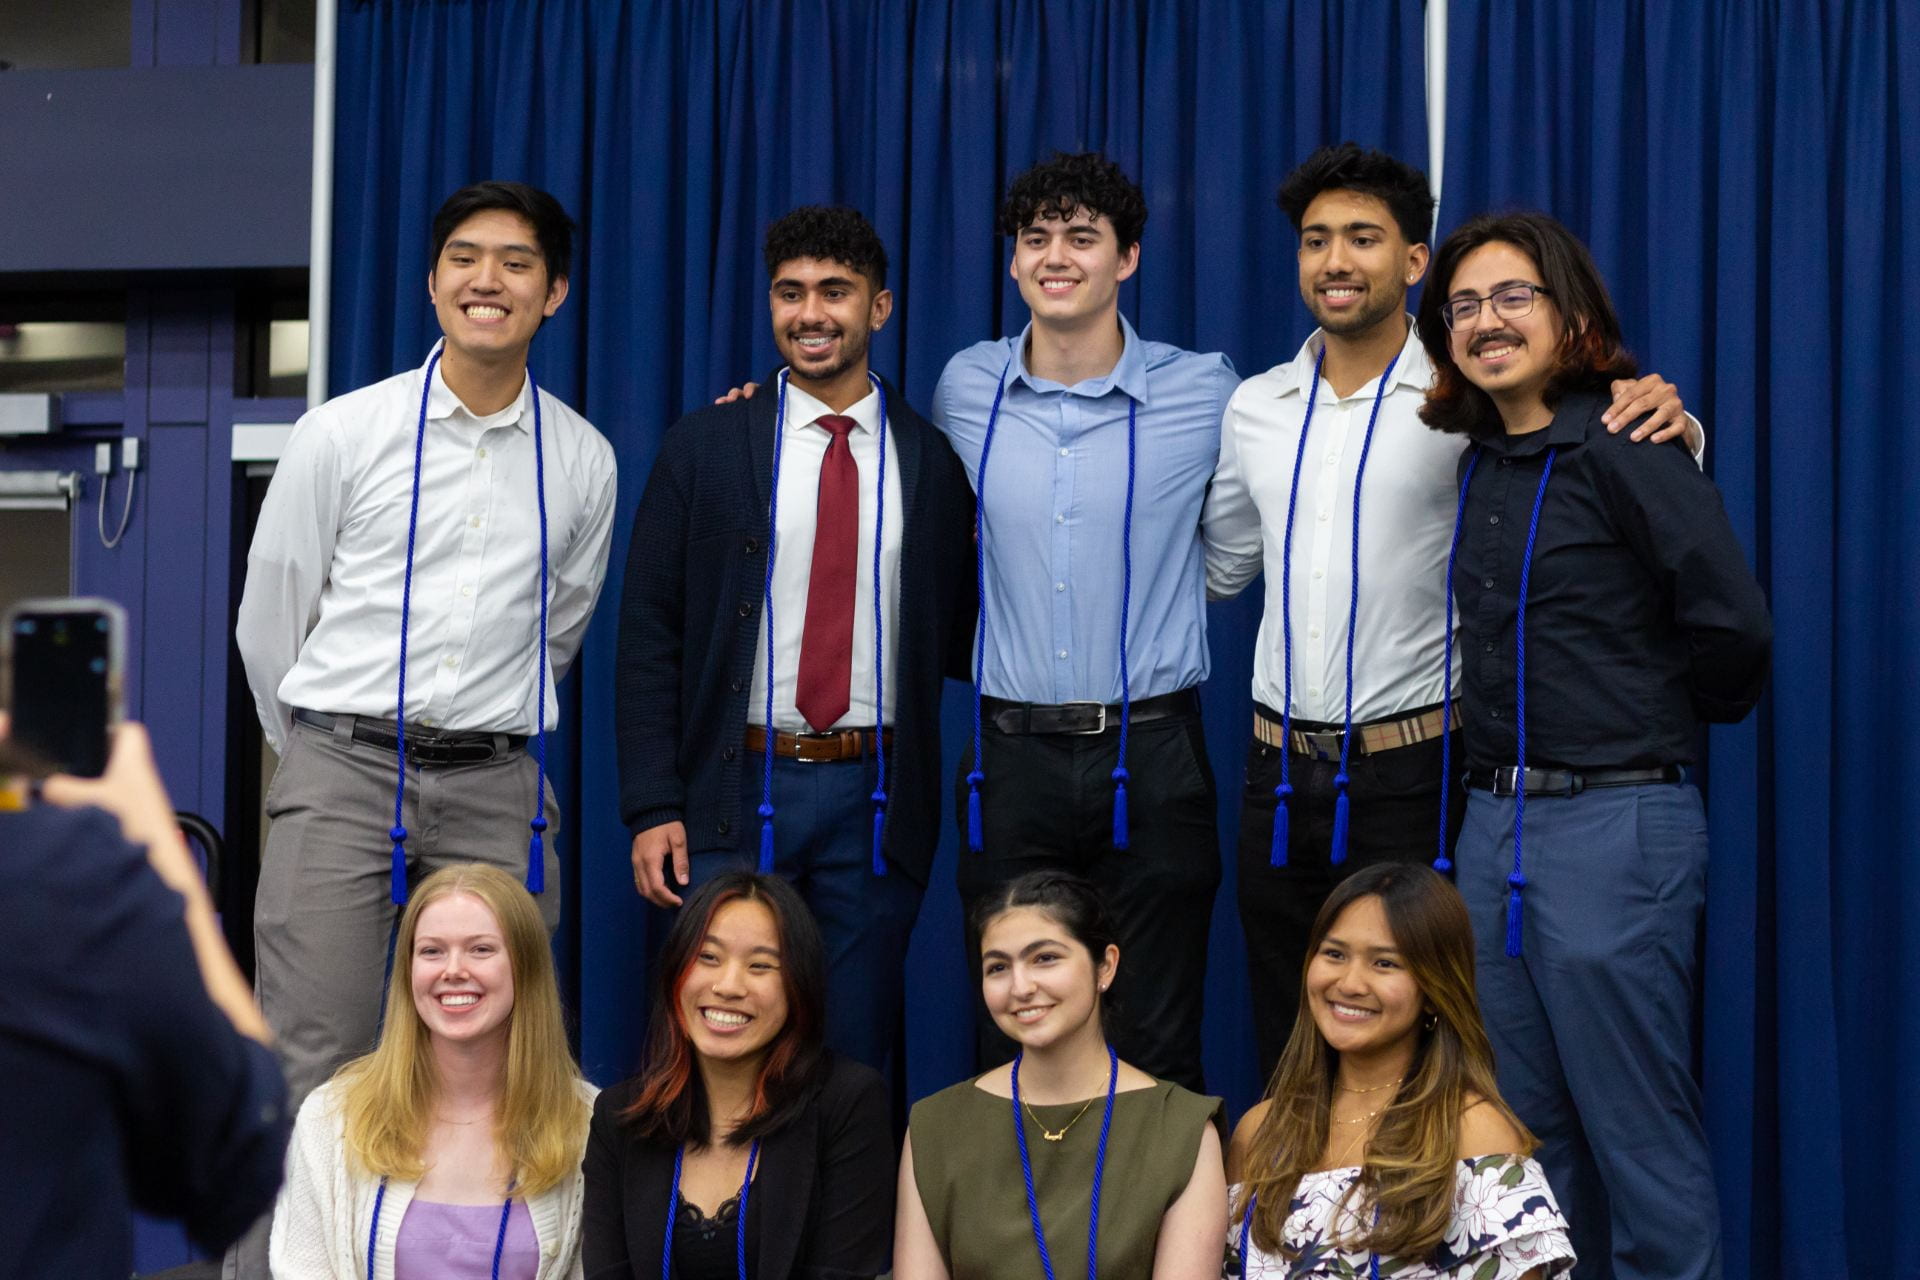 9 honors students pose with their blue honors coords and get into two rows to take a photo in front of a matching blue curtain